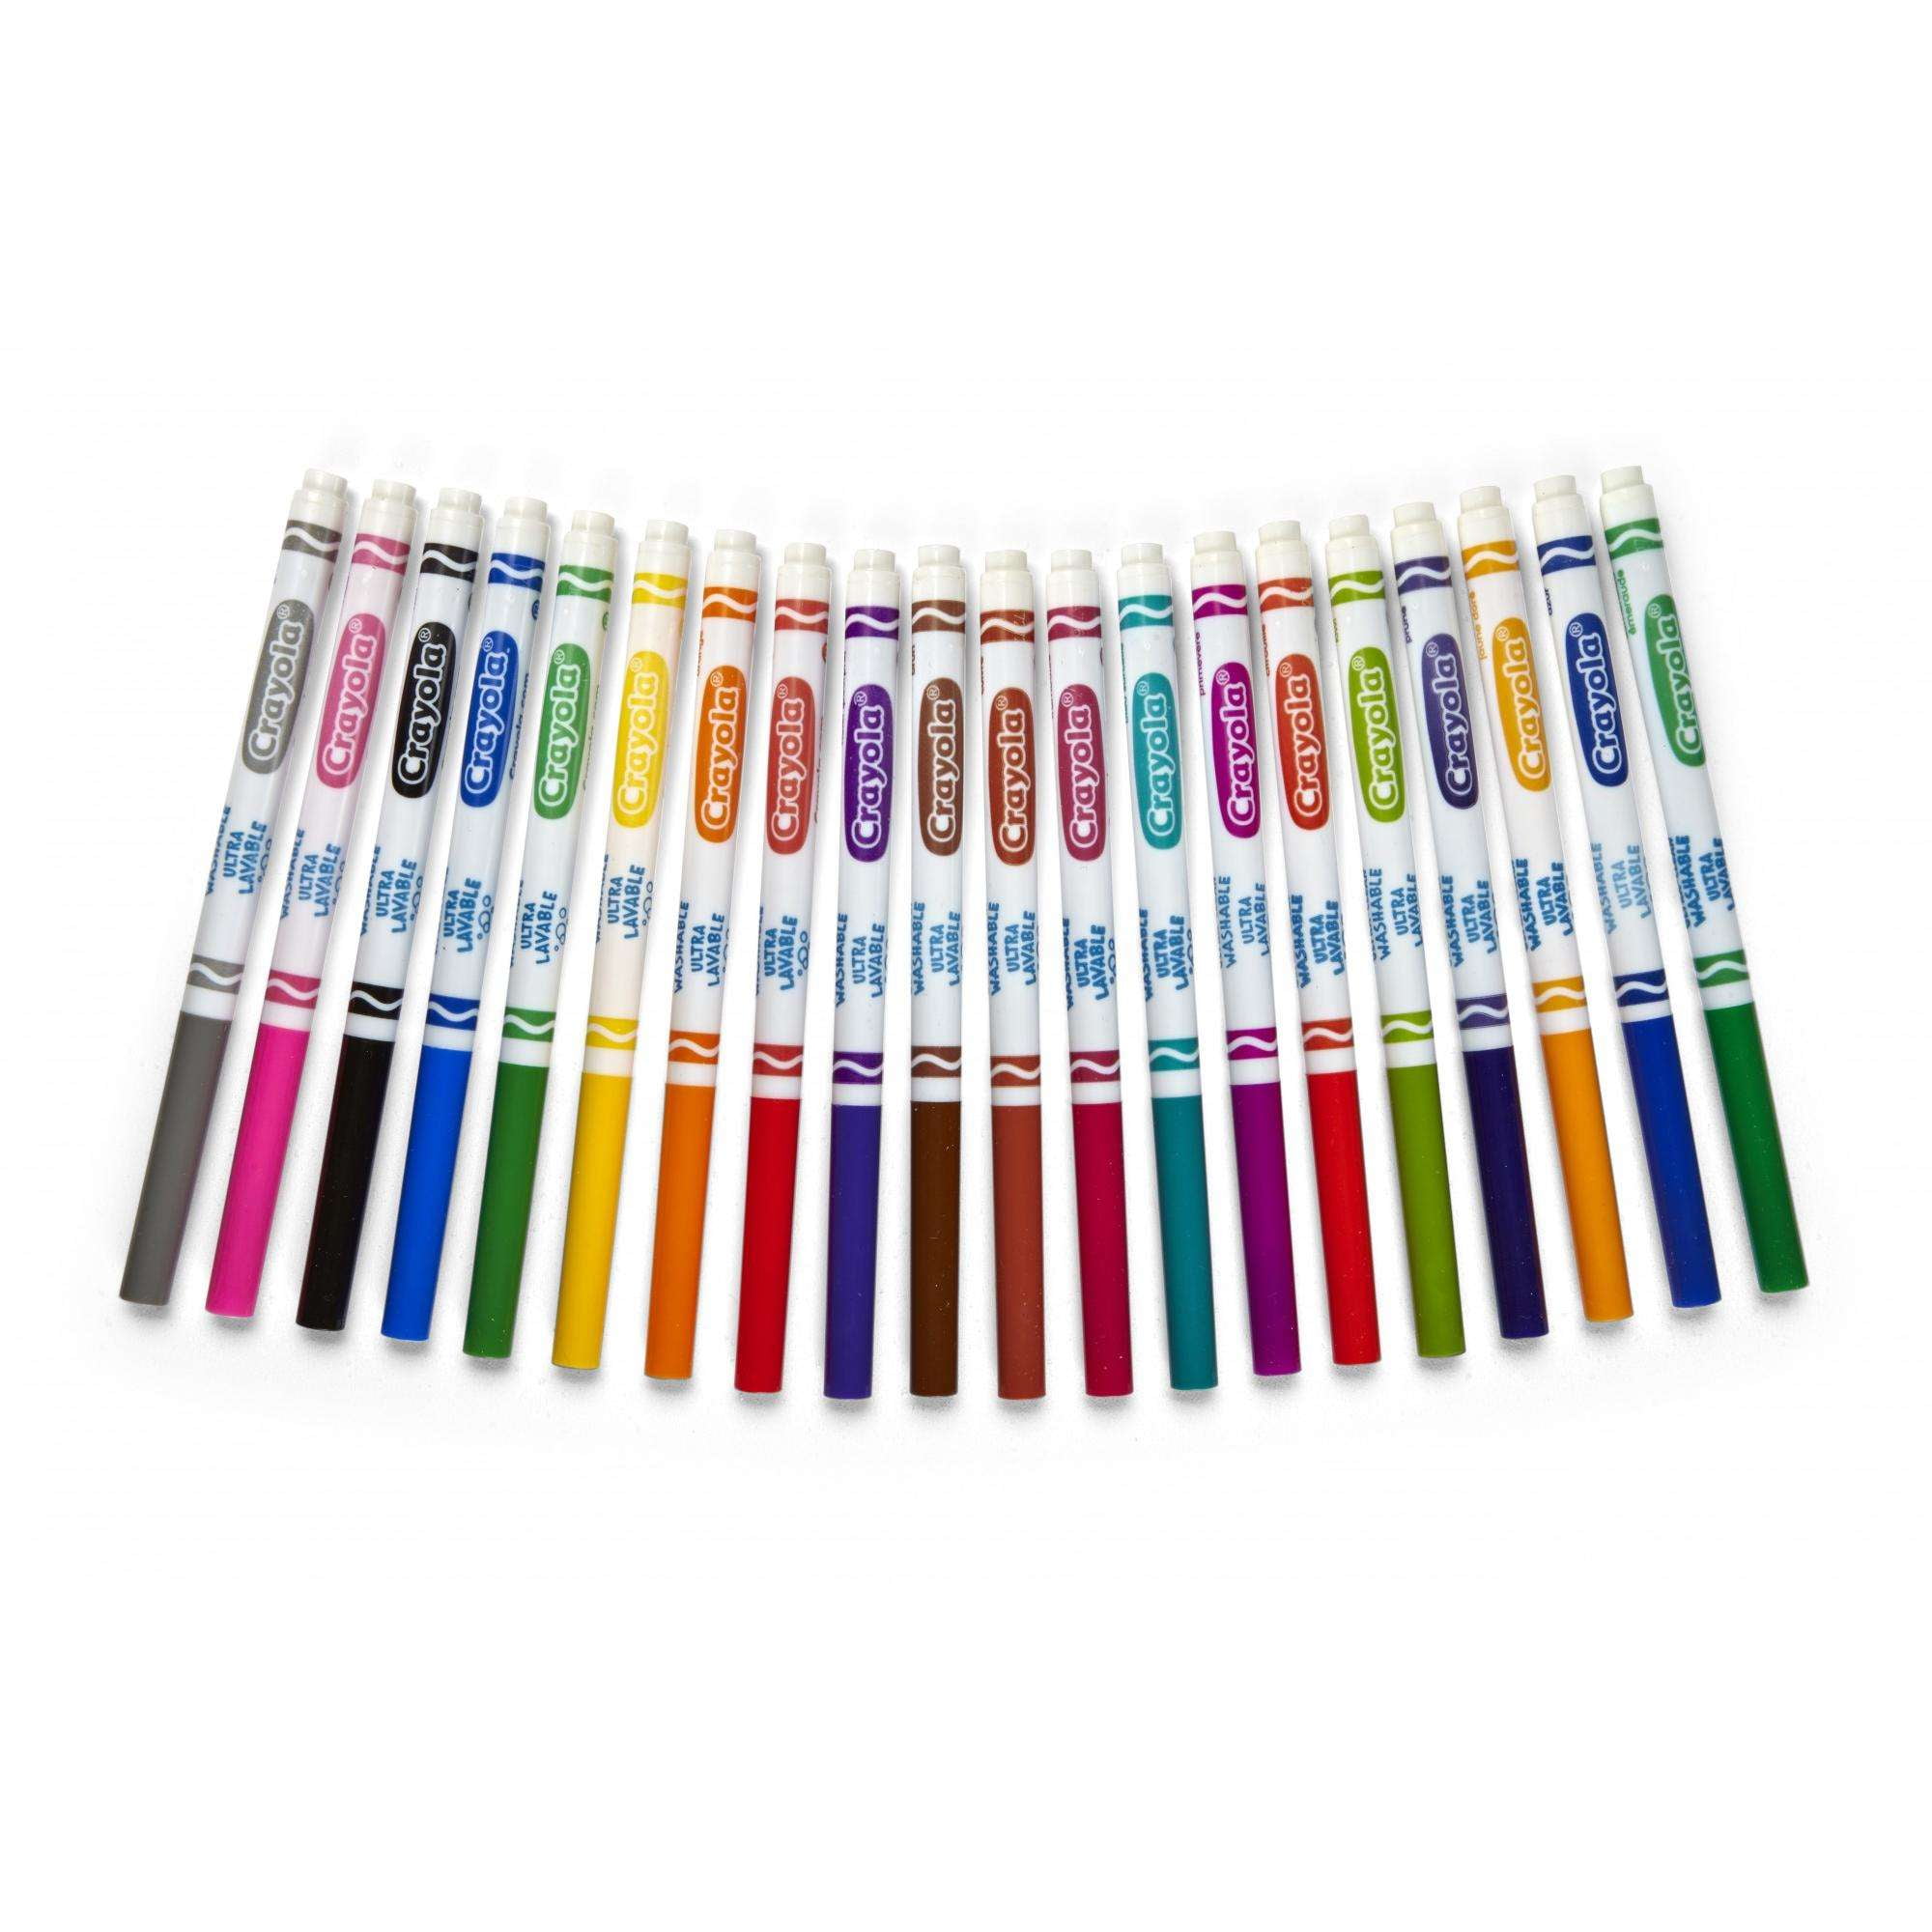 Crayola Ultra-Clean Washable Color Markers, Fine-Line, Assorted Colors,  Pack Of 200